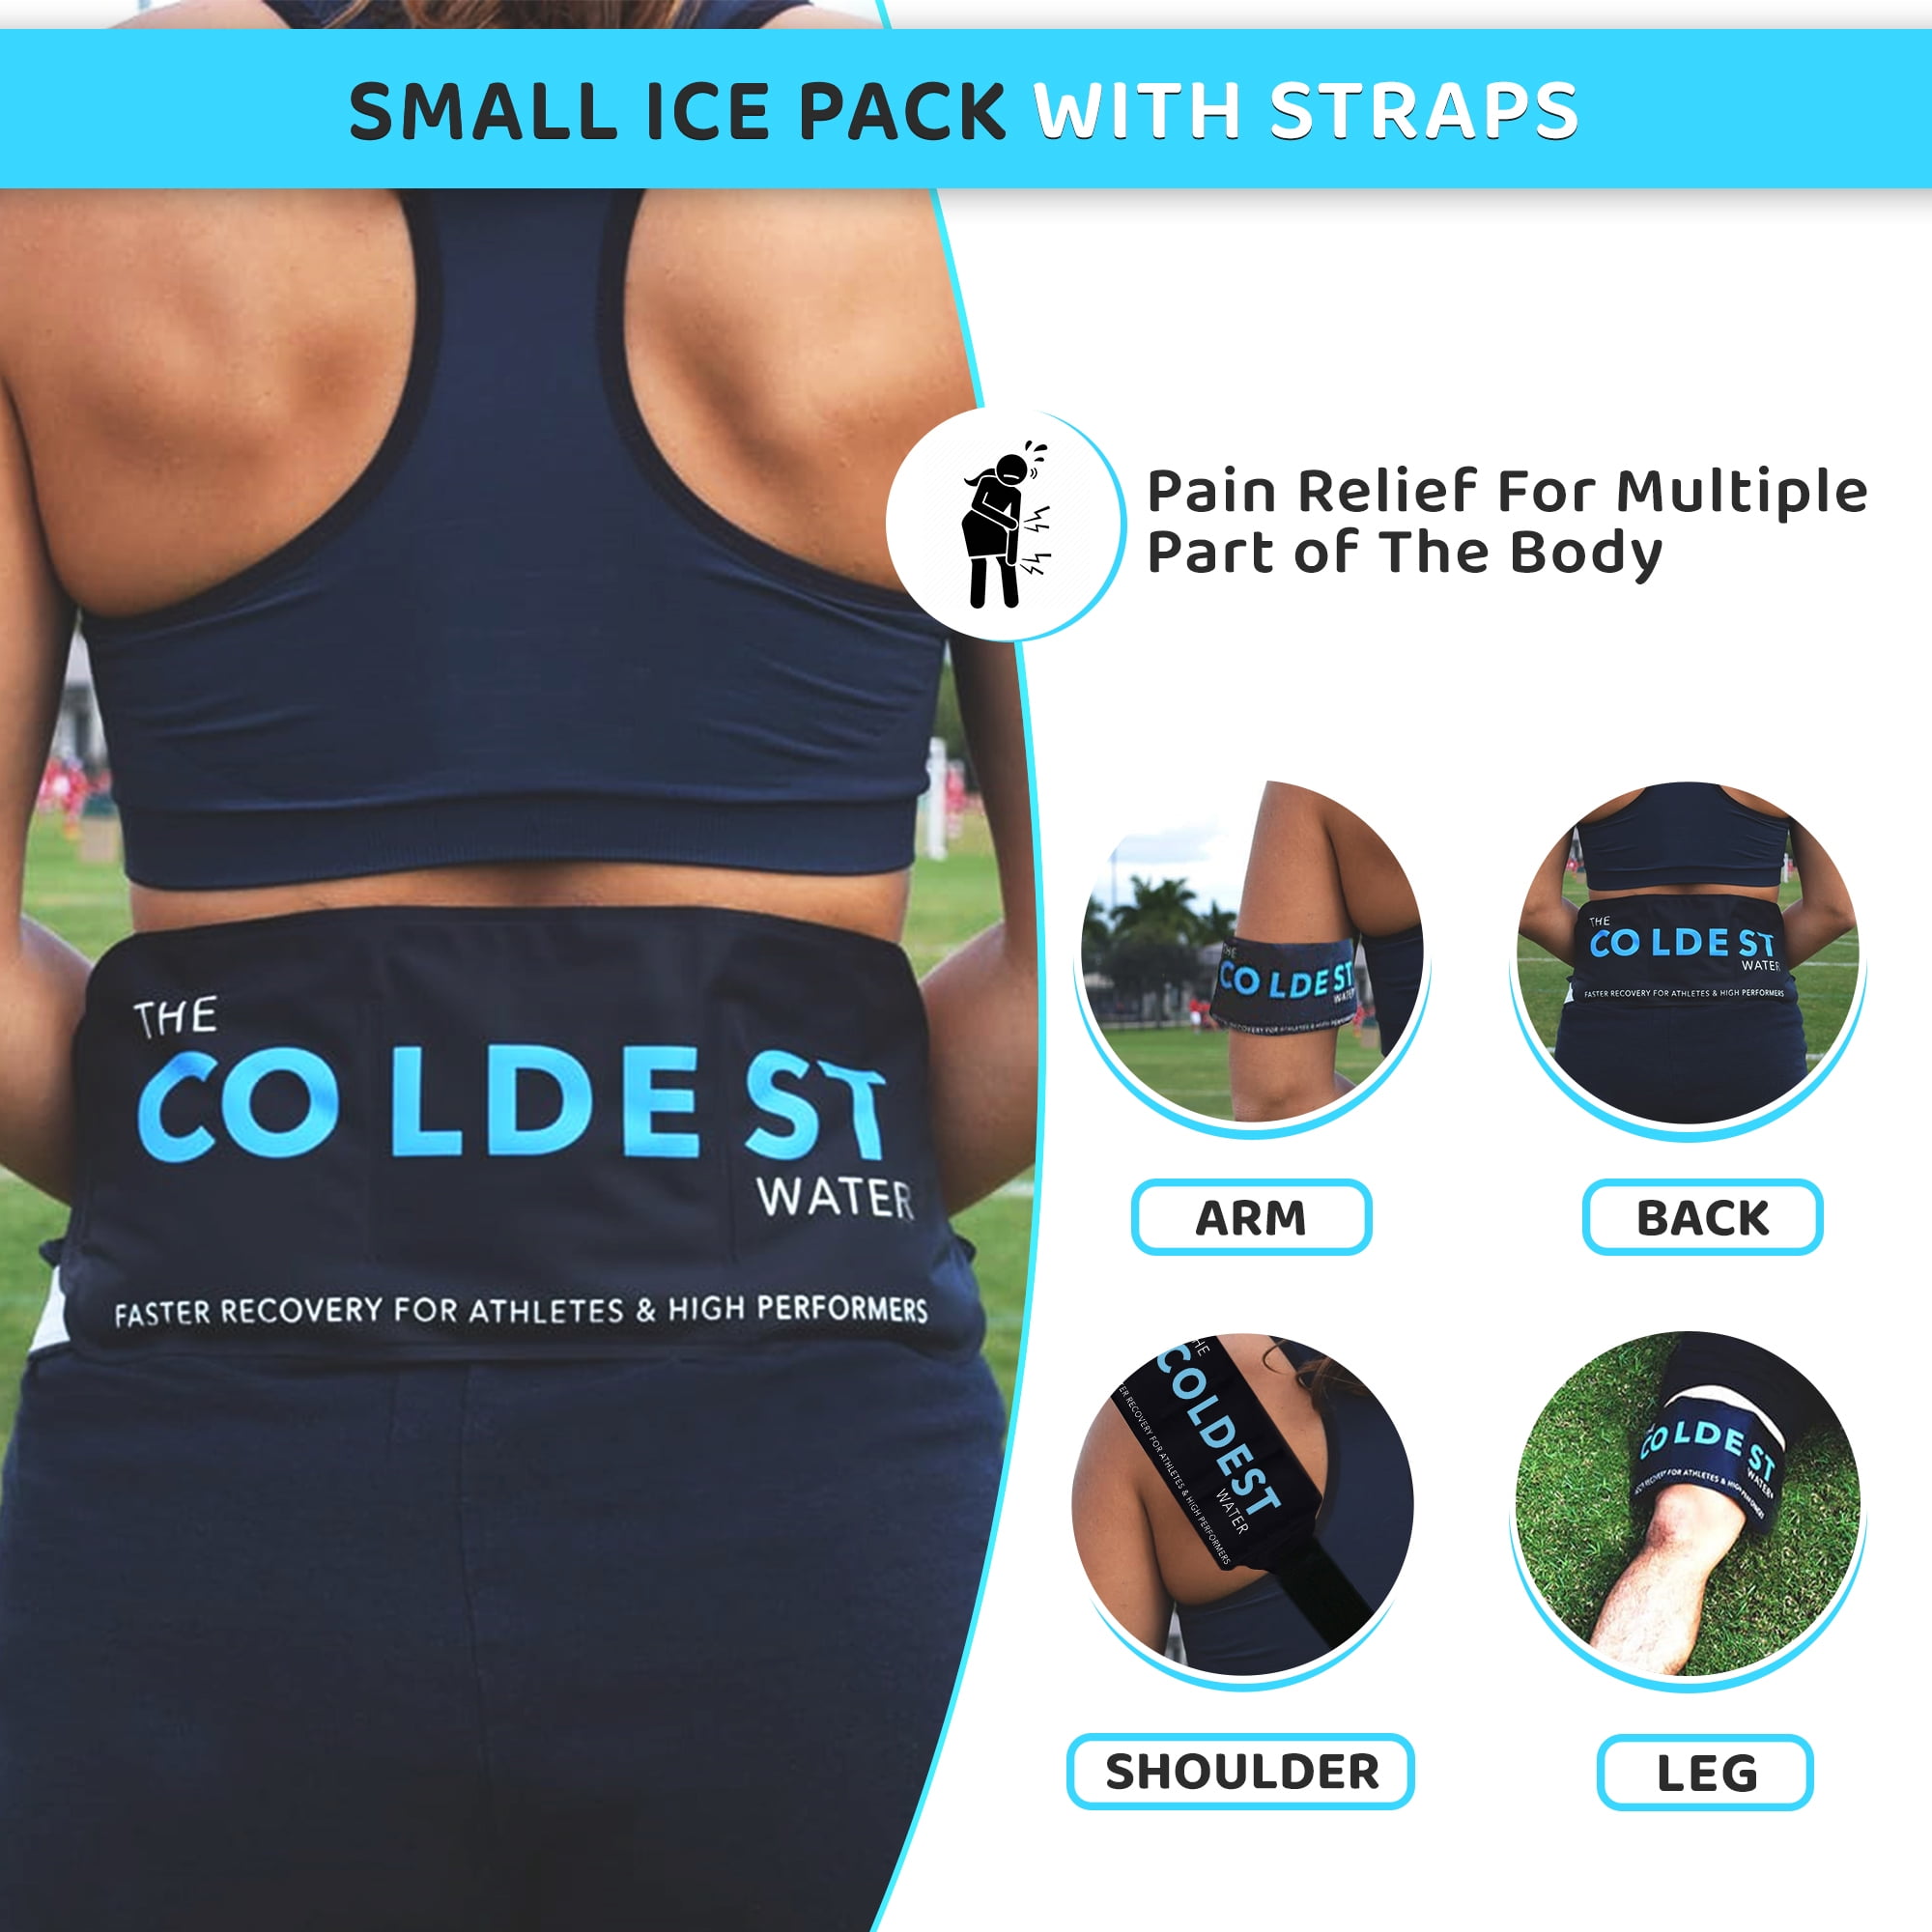 The Coldest Ice Pack Gel Reusable - Hot + Cold Therapy - Flexible Compress  Best for Back Pain Hip Shoulder Neck Ankle Sprain Recovery, Muscle Injury  Medical Grade (5.6 x 7.4) 